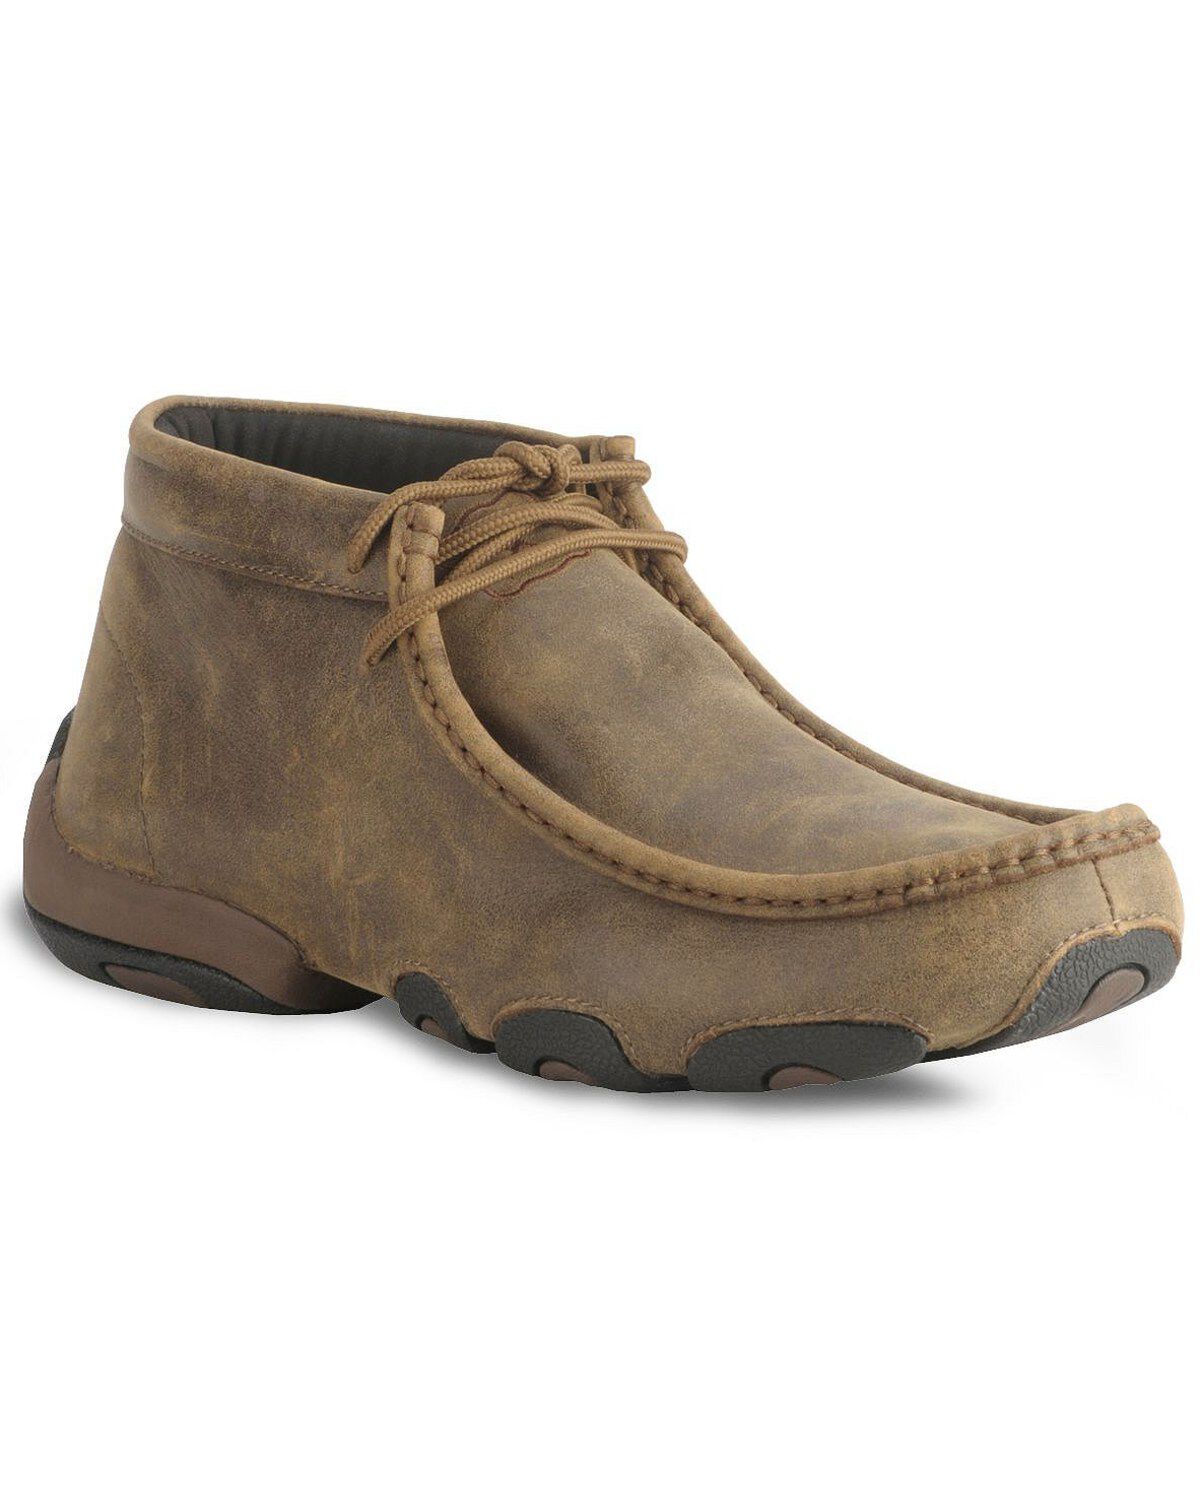 Men's Twisted X Boots \u0026 Shoes - Boot Barn